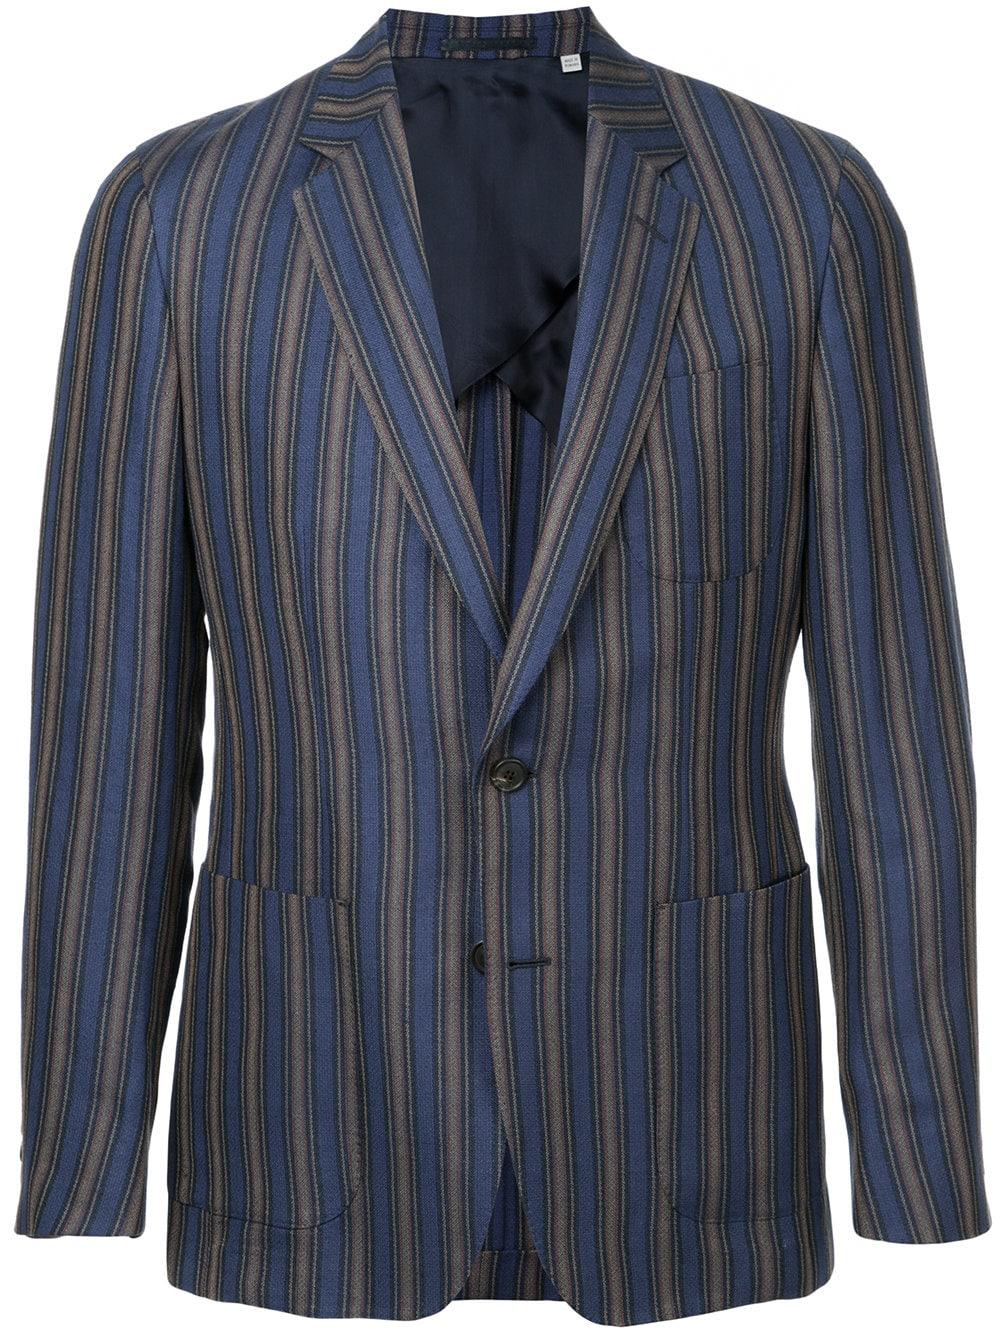 Gieves & Hawkes Wool Stripe Fitted Blazer in Blue for Men - Lyst